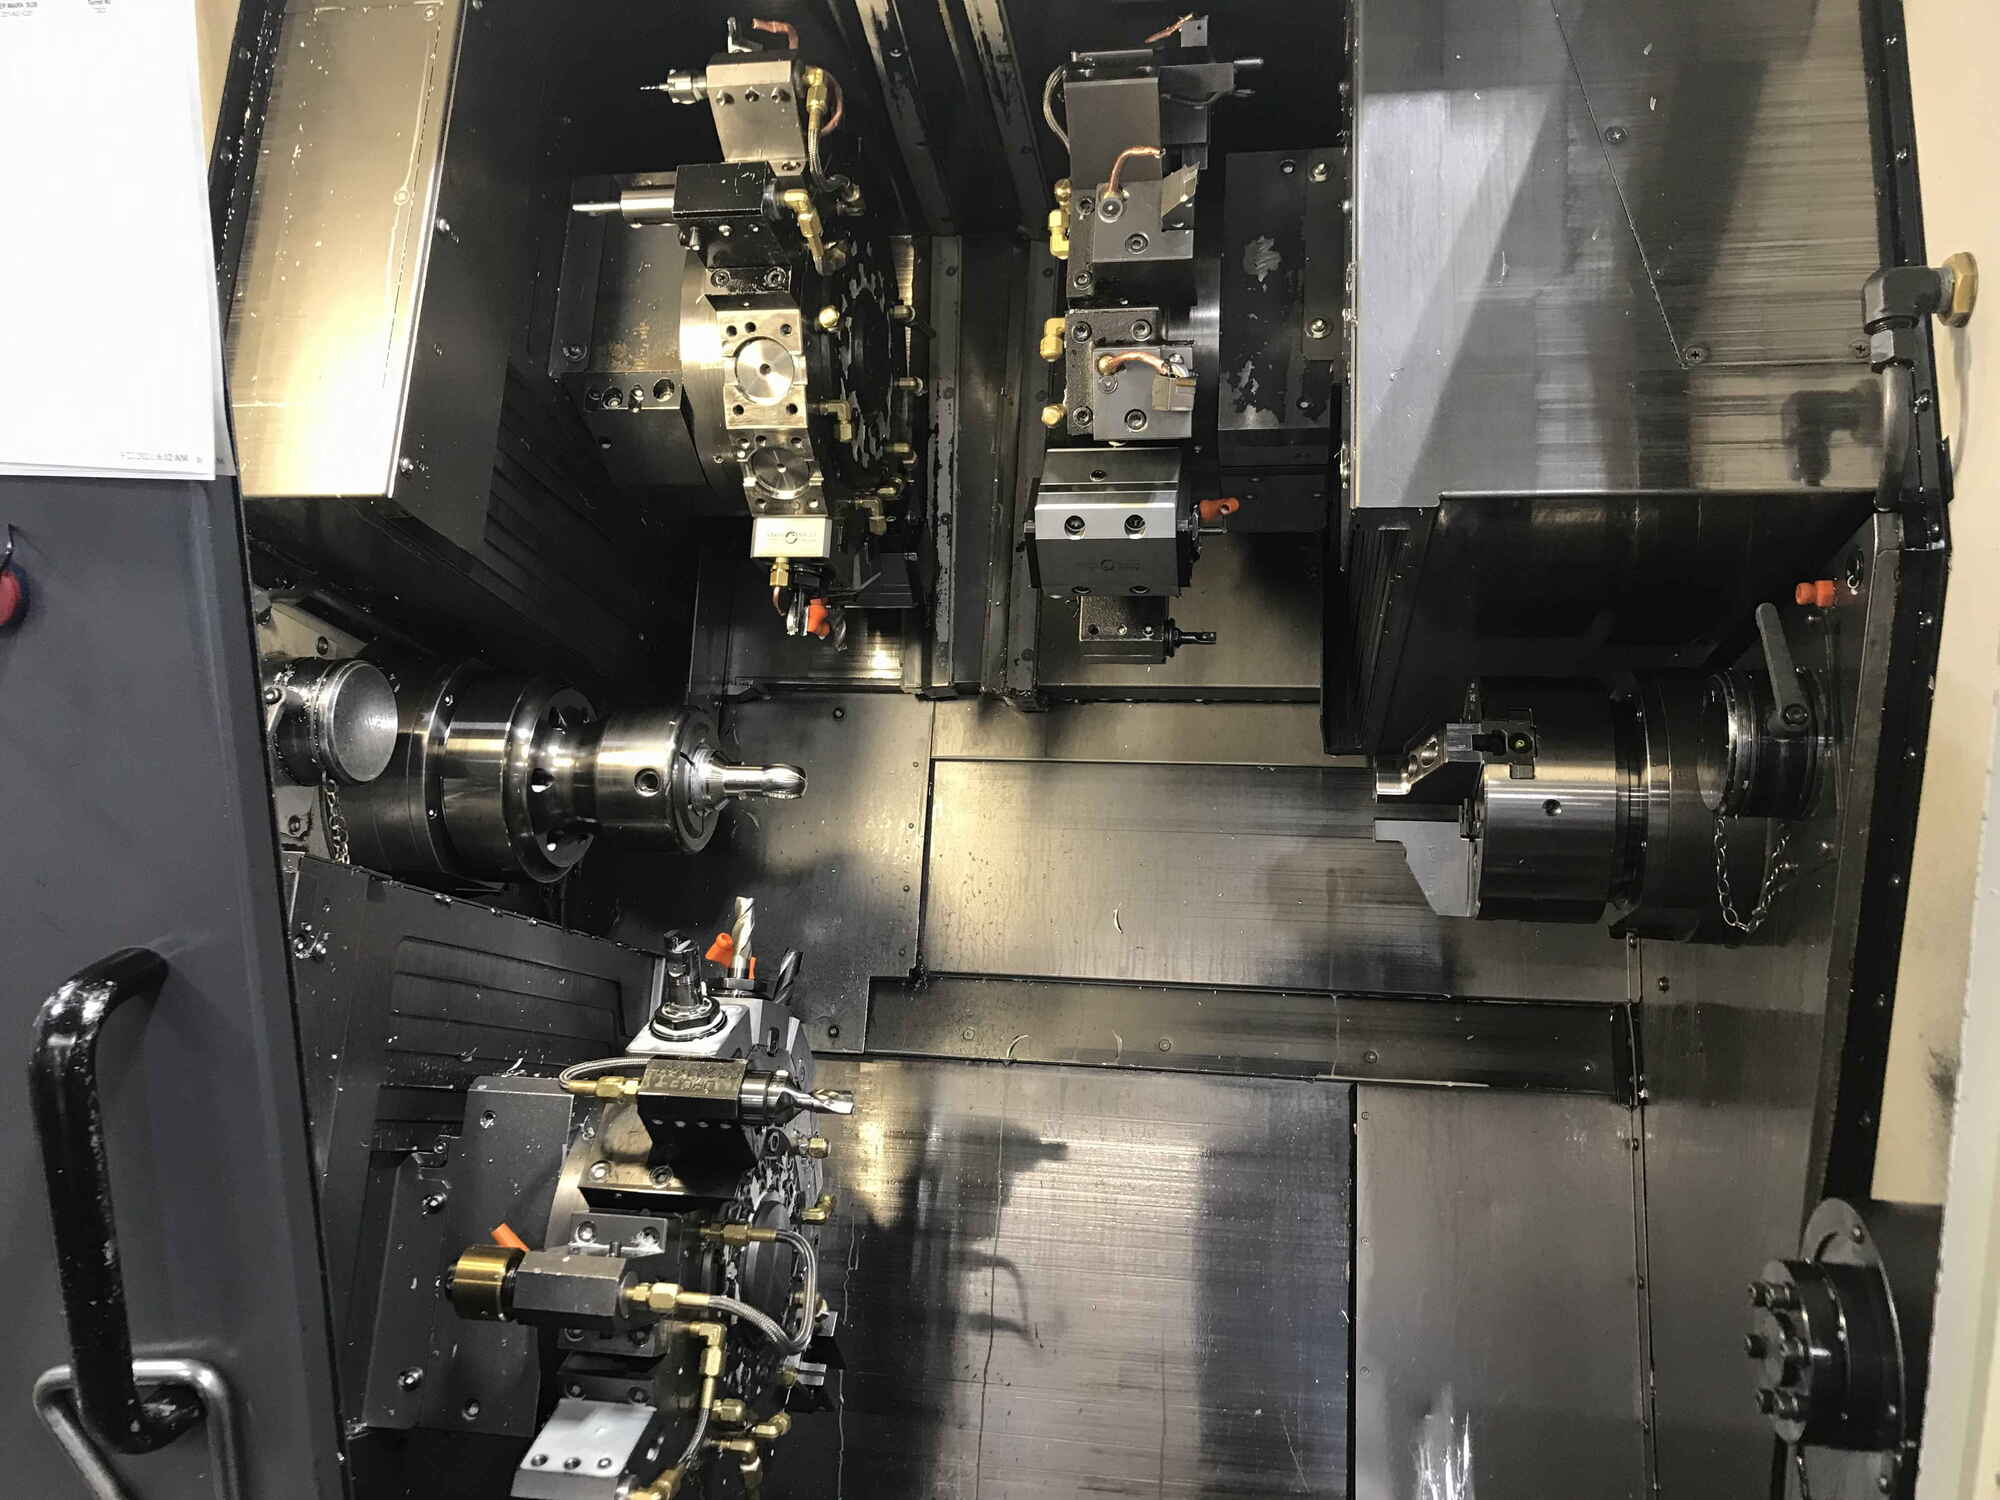 2012 NAKAMURA-TOME NTY3-150 5-Axis or More CNC Lathes | Midstate Machinery